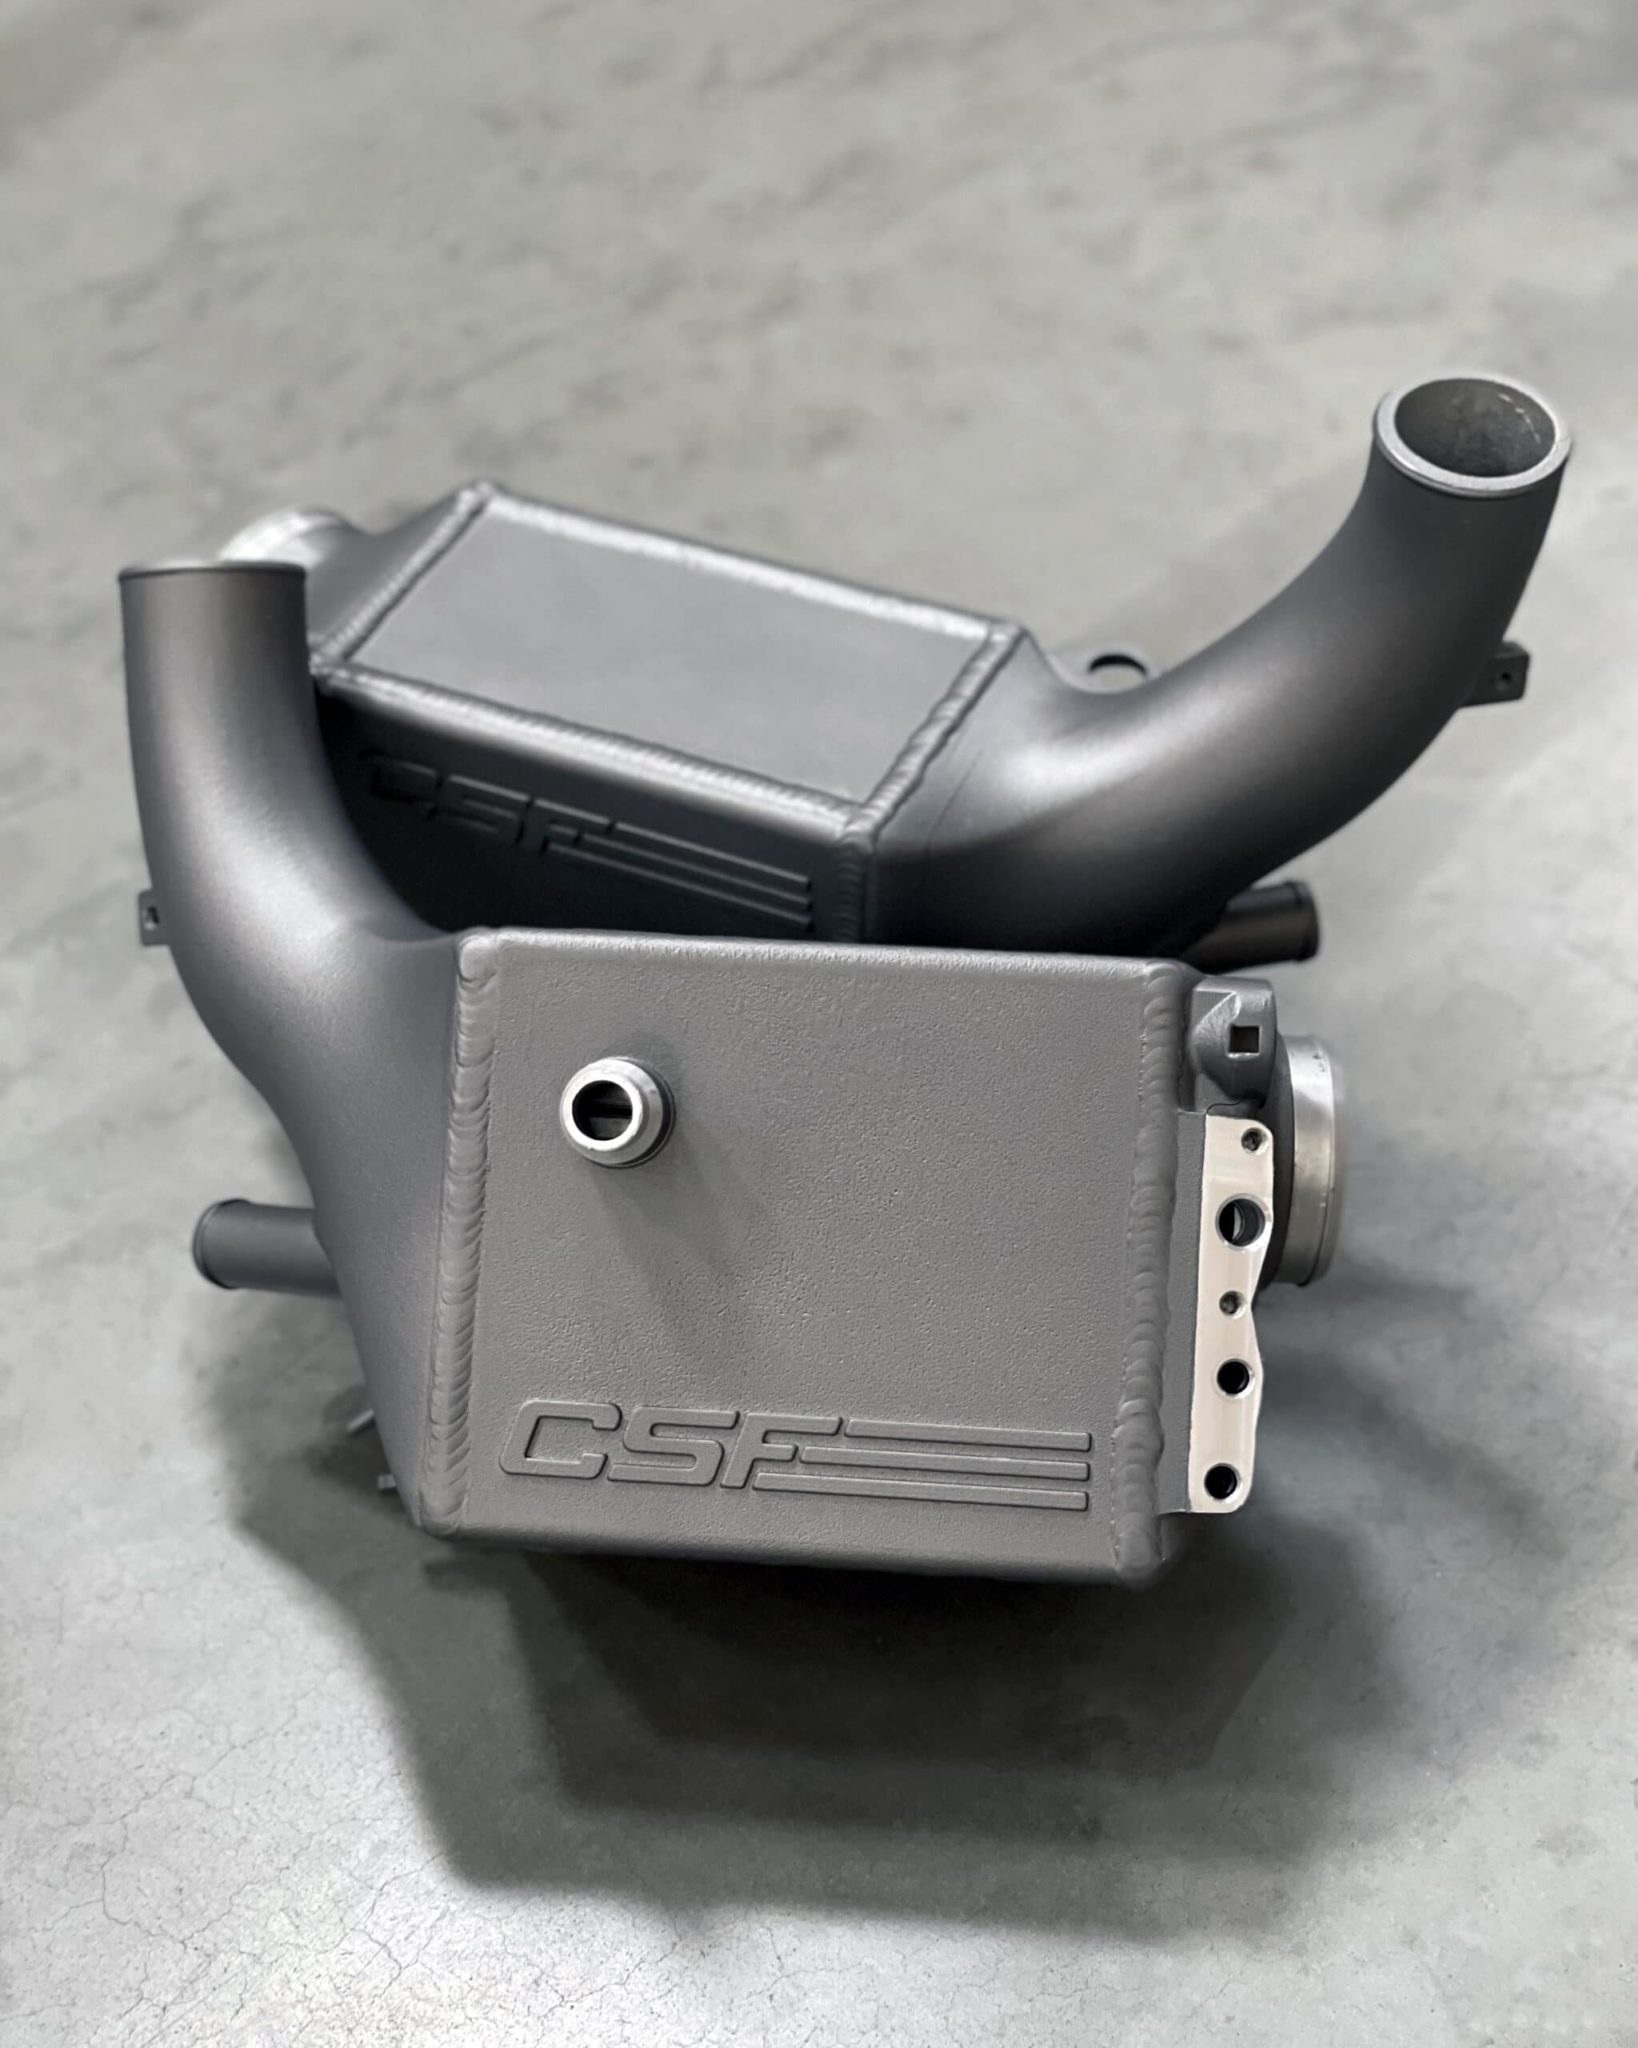 F90 M5 & F92 M8 High-Performance Charge Coolers in custom Heat Dispersion Thermal Coating - Space Grey